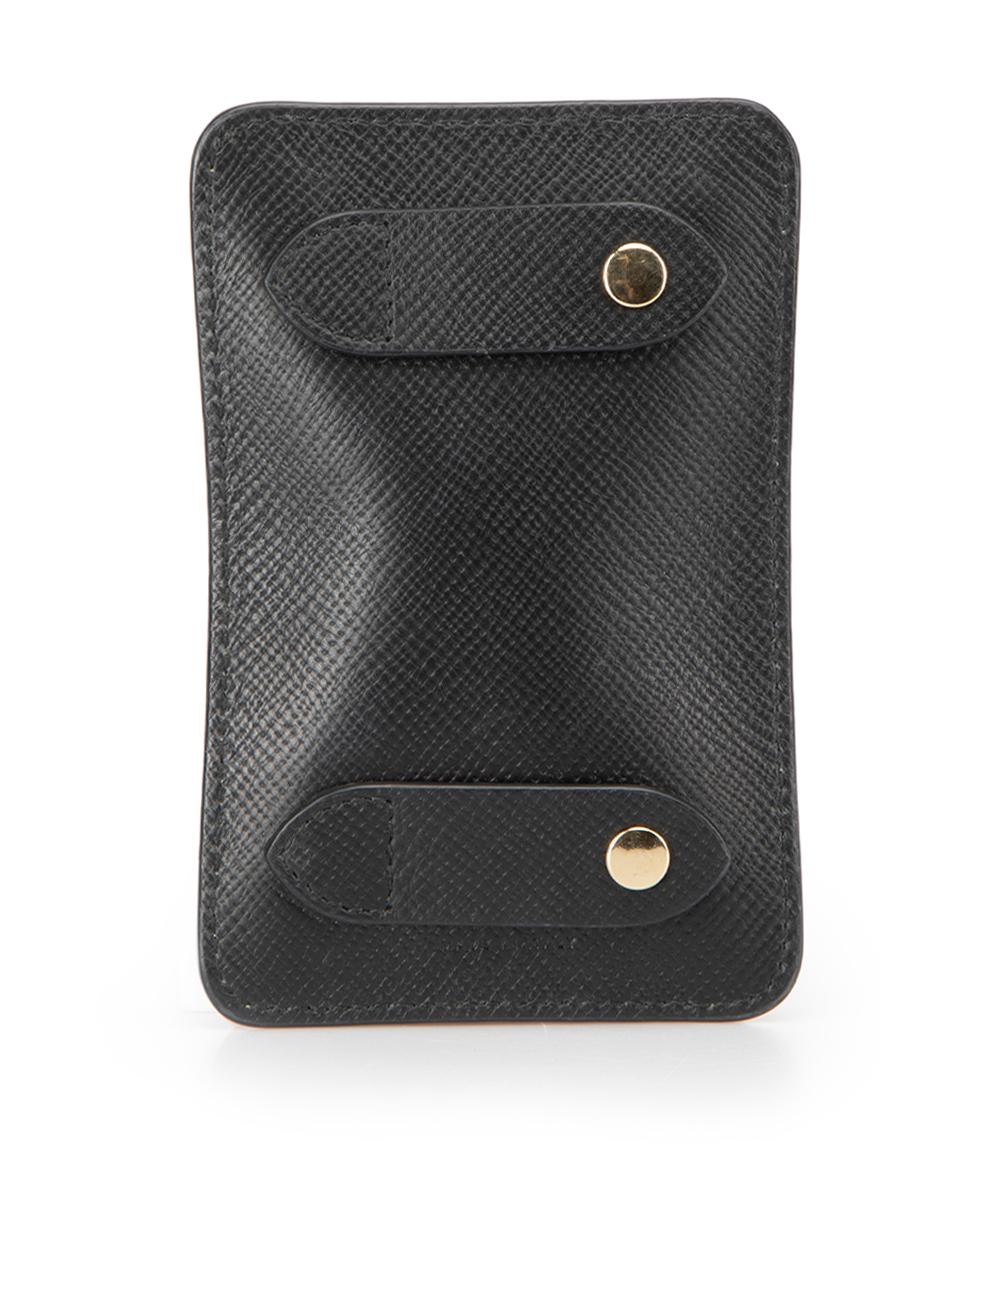 Smythson Women's Black Leather Contrast Zippers Pouch In Good Condition For Sale In London, GB